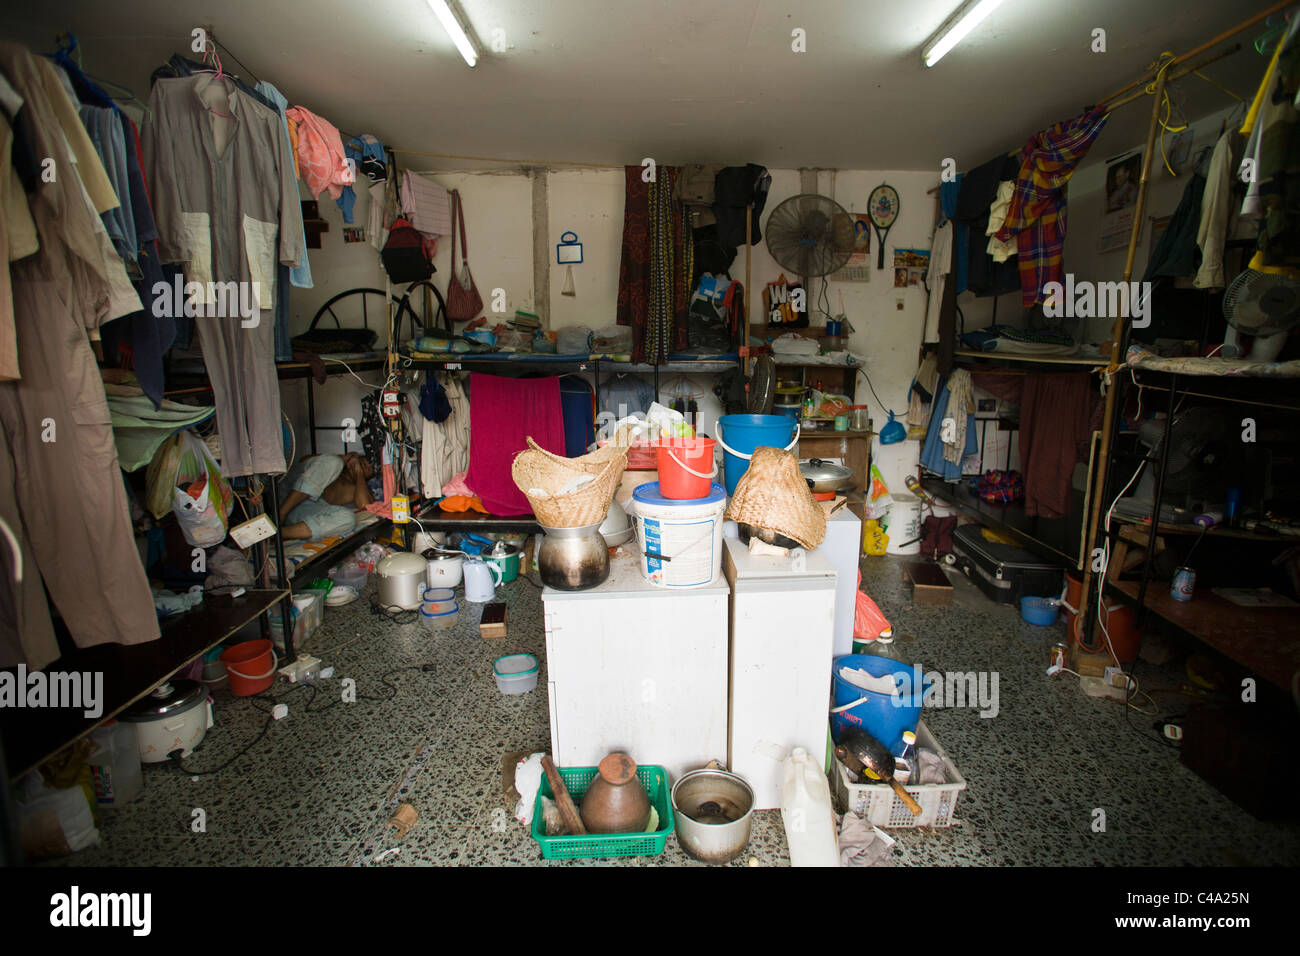 A foreign worker Inside a room in a dormitory for foreign workers in Singapore Stock Photo